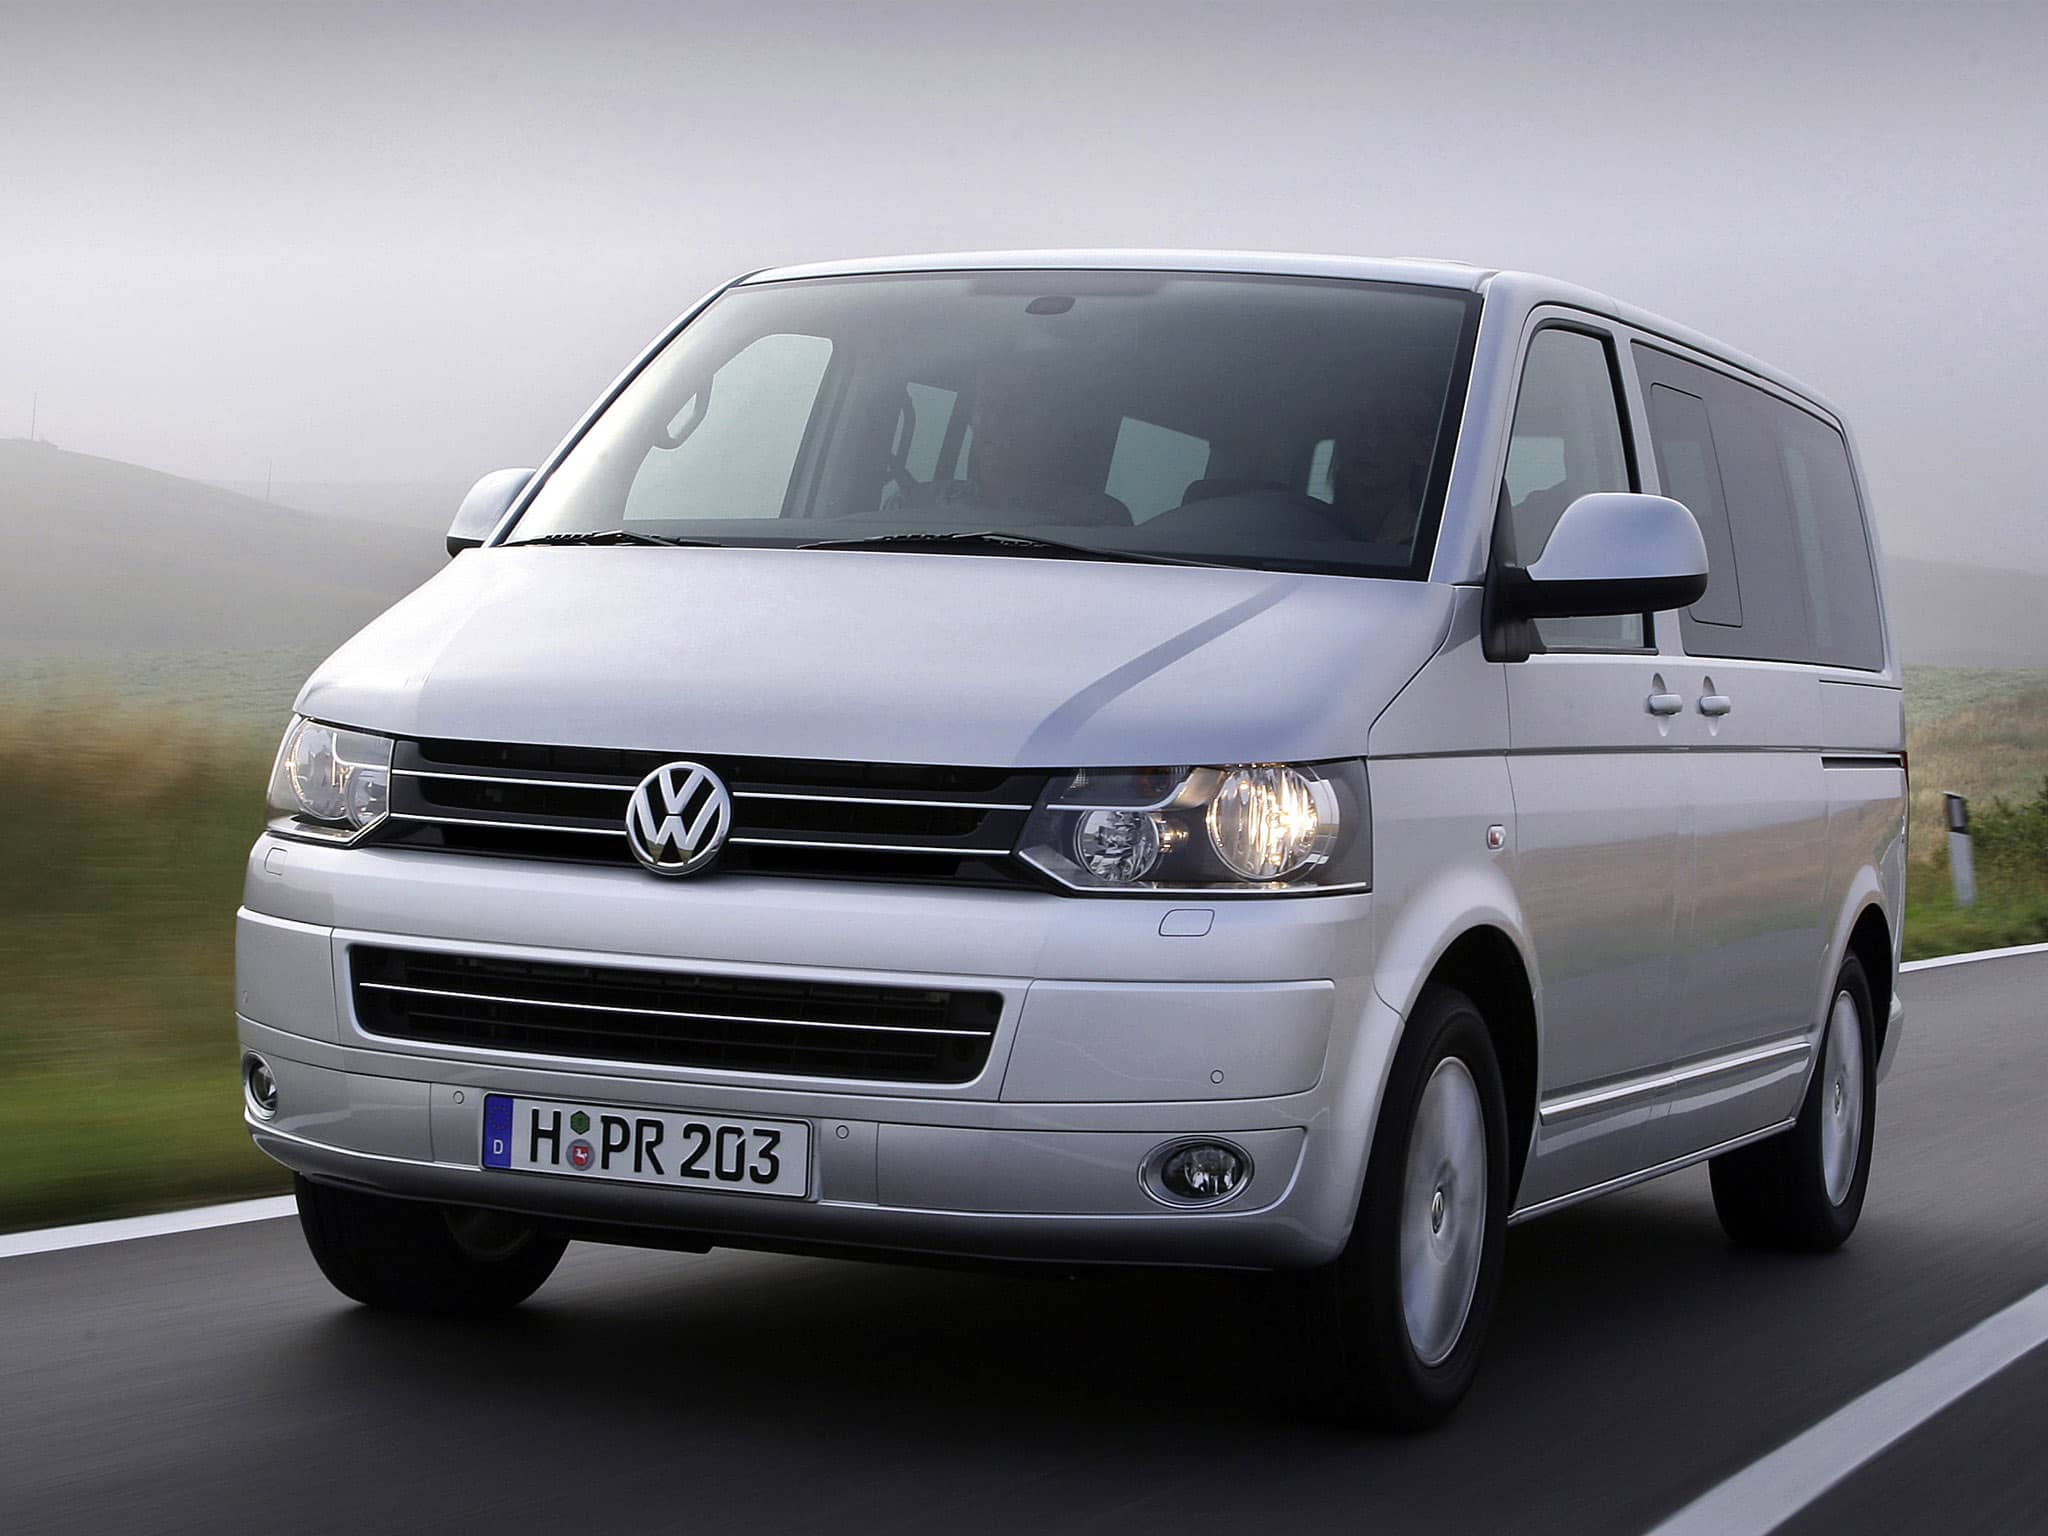 Volkswagen Transporter shuttle USed to describe our top 10 cars for taxi service blog